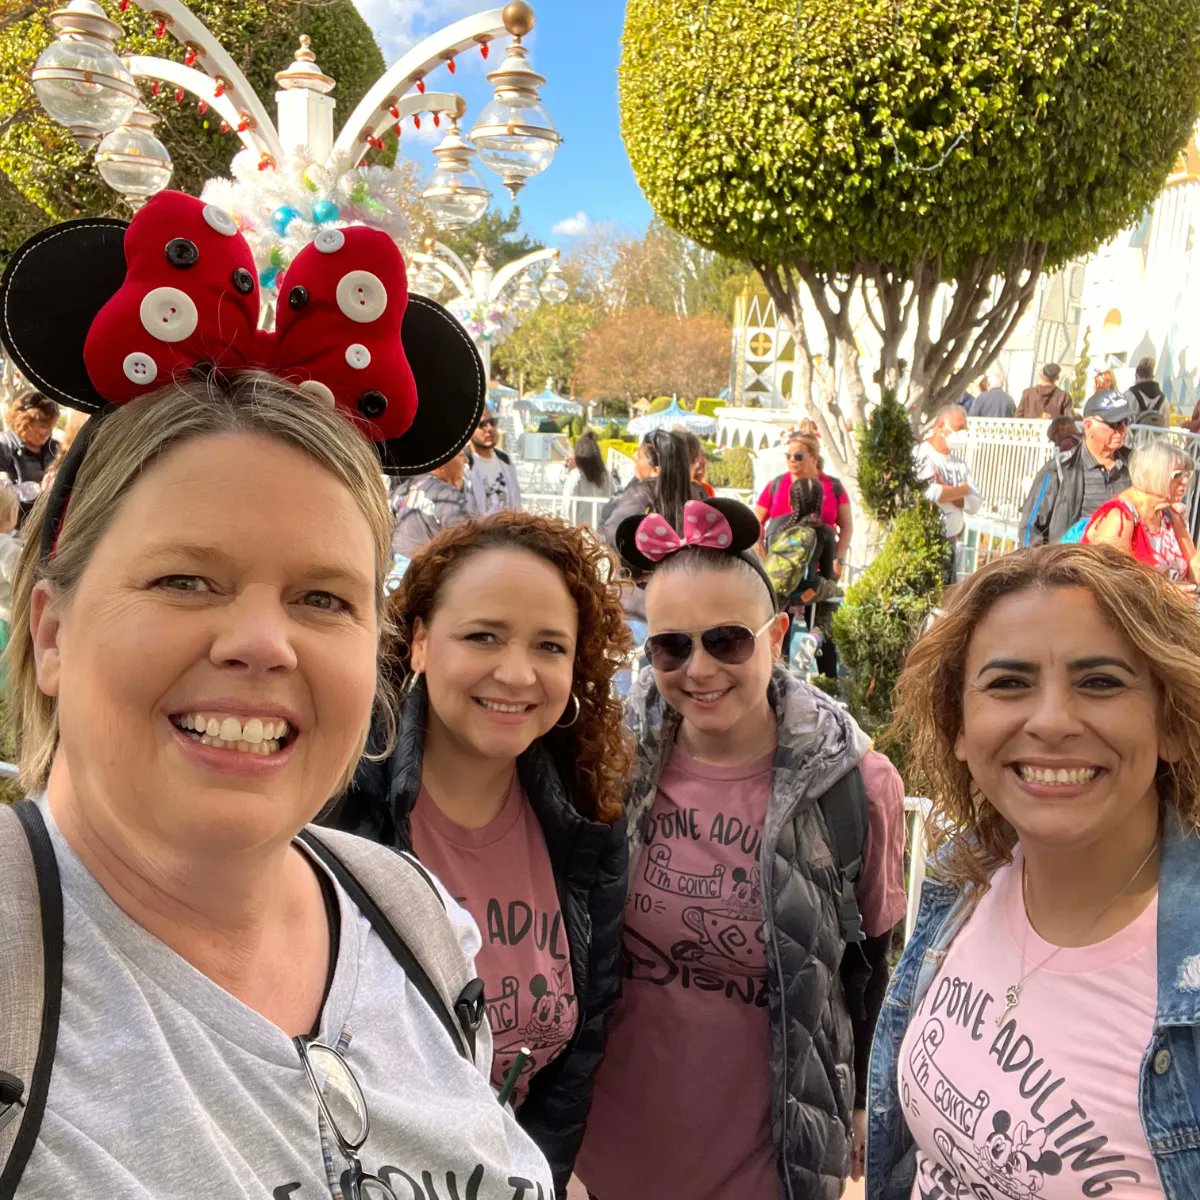 We want to give a shout out to our amazing case management team. If you've worked with them, then you know how awesome they are. Go Team FFP!

#FFP #lifeinsurance #lifeagency #Disneyland #teambuilding #casemanagement #motivation #dreamteam